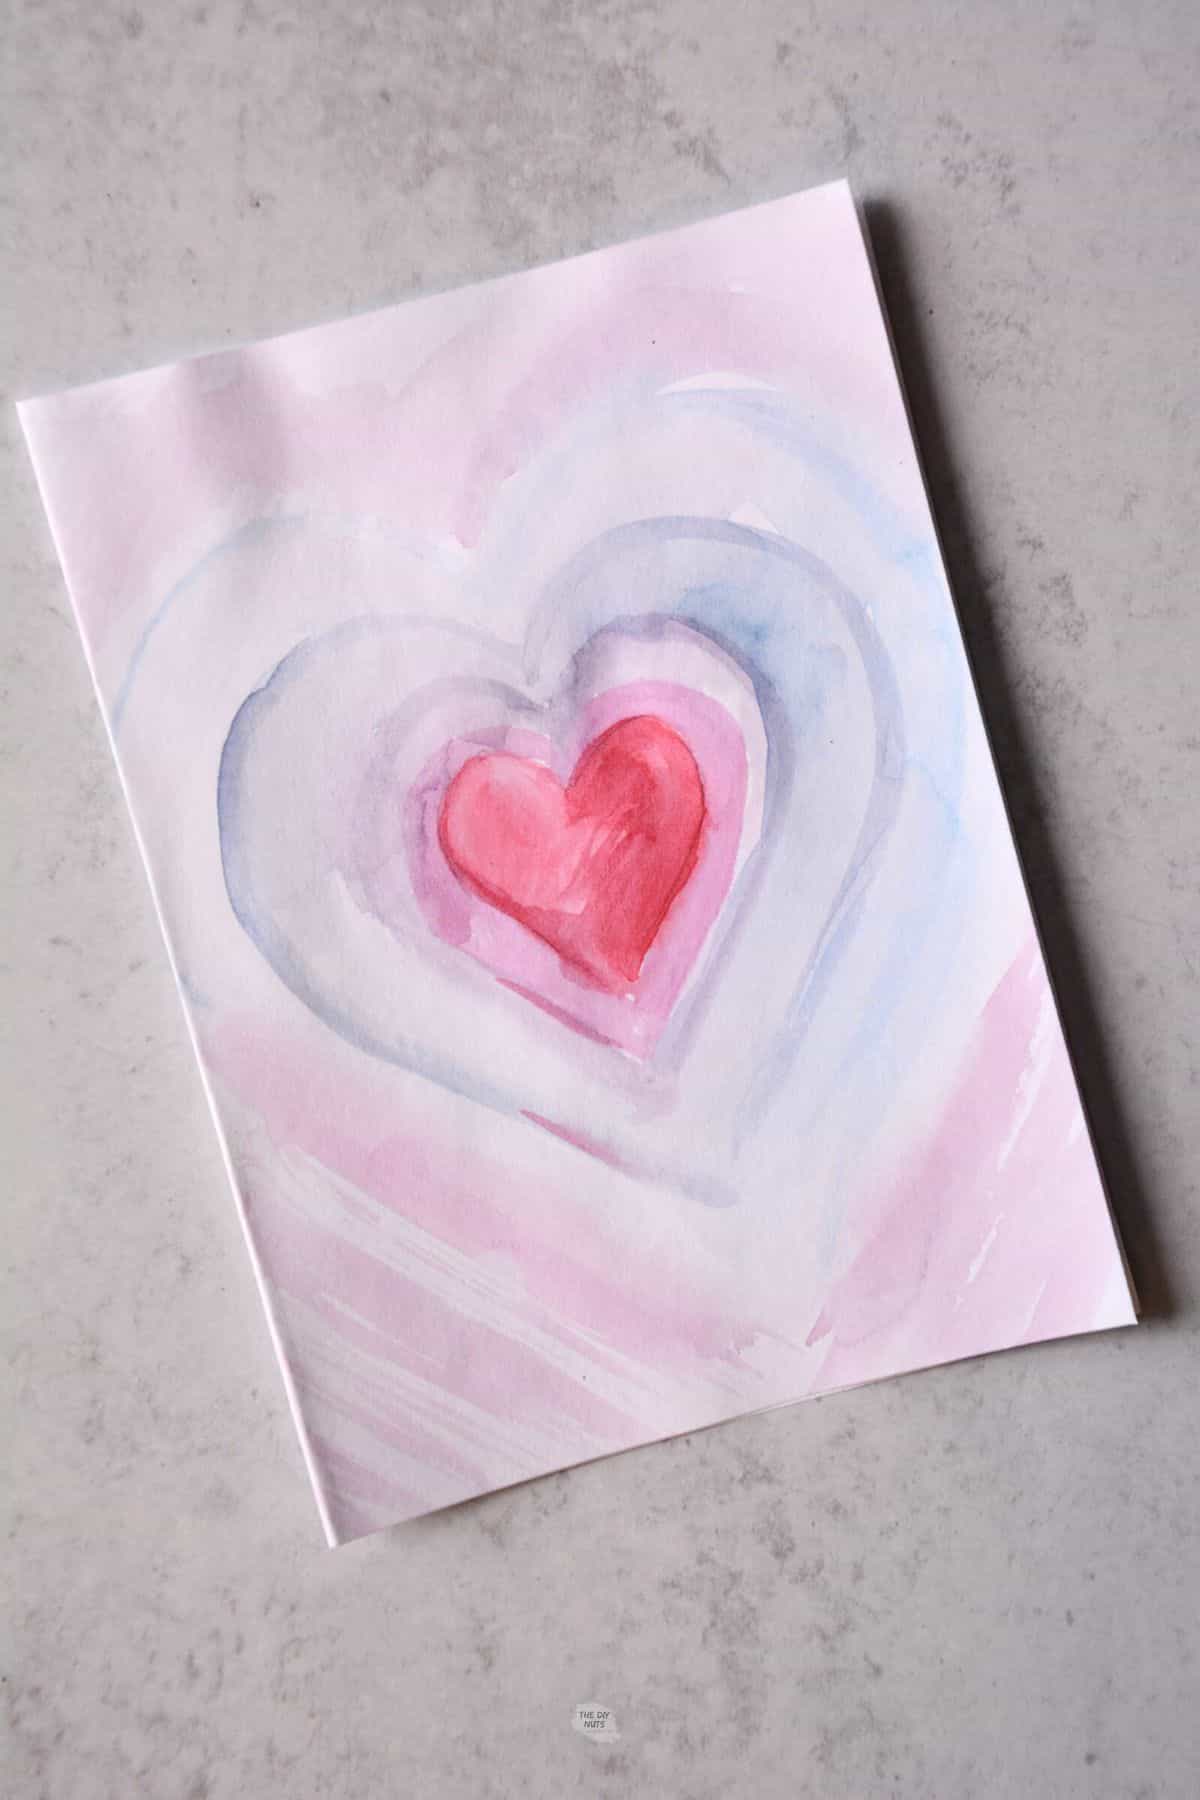 painted watercolor heart Valentine's card with purple and red paint.